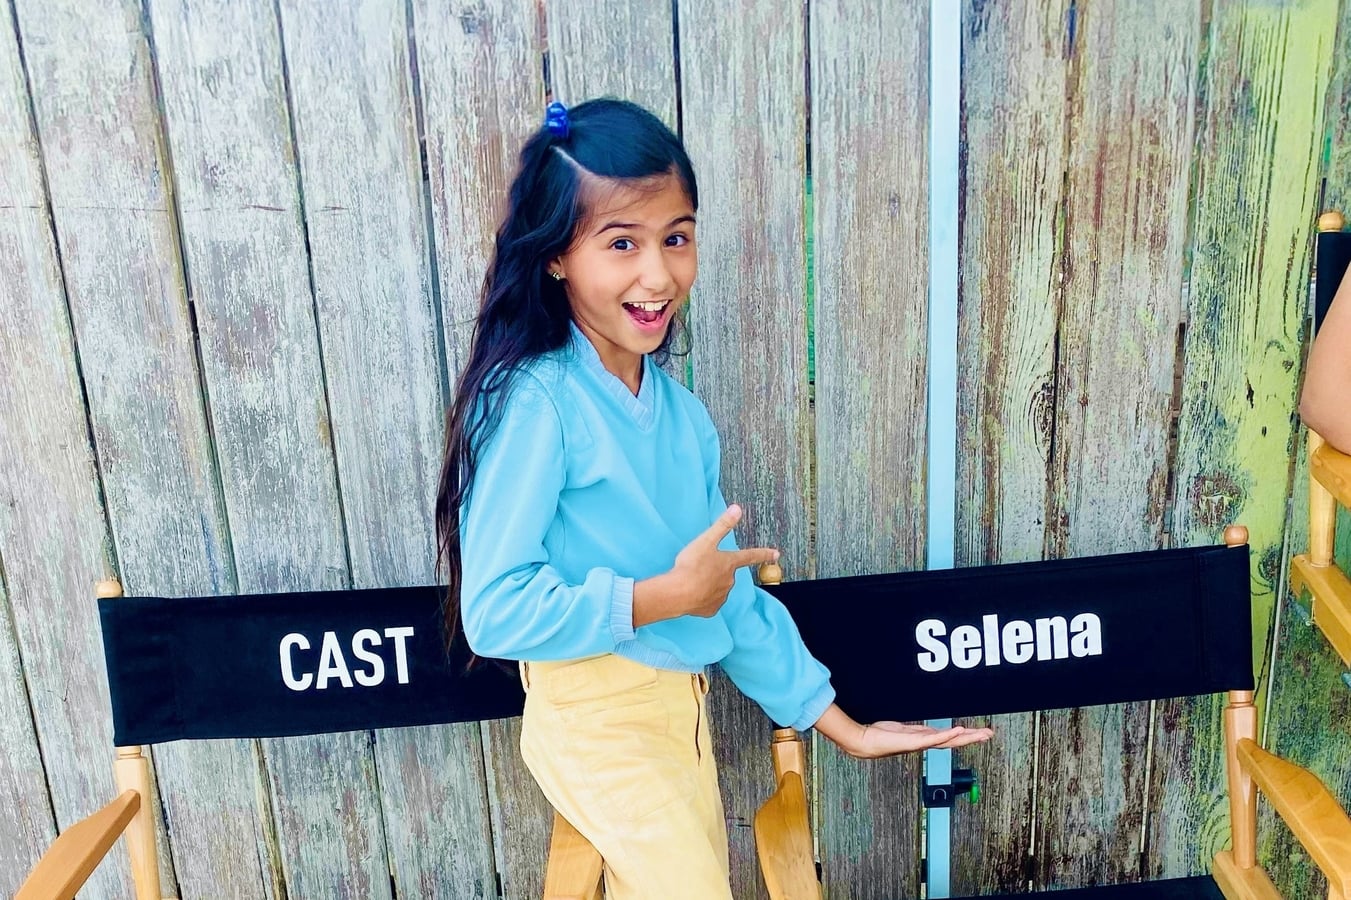 Now that Netflix's 'Selena: The Series' is out in the world, fans are already sharing their fav moments from the show. Check out the best scenes here.